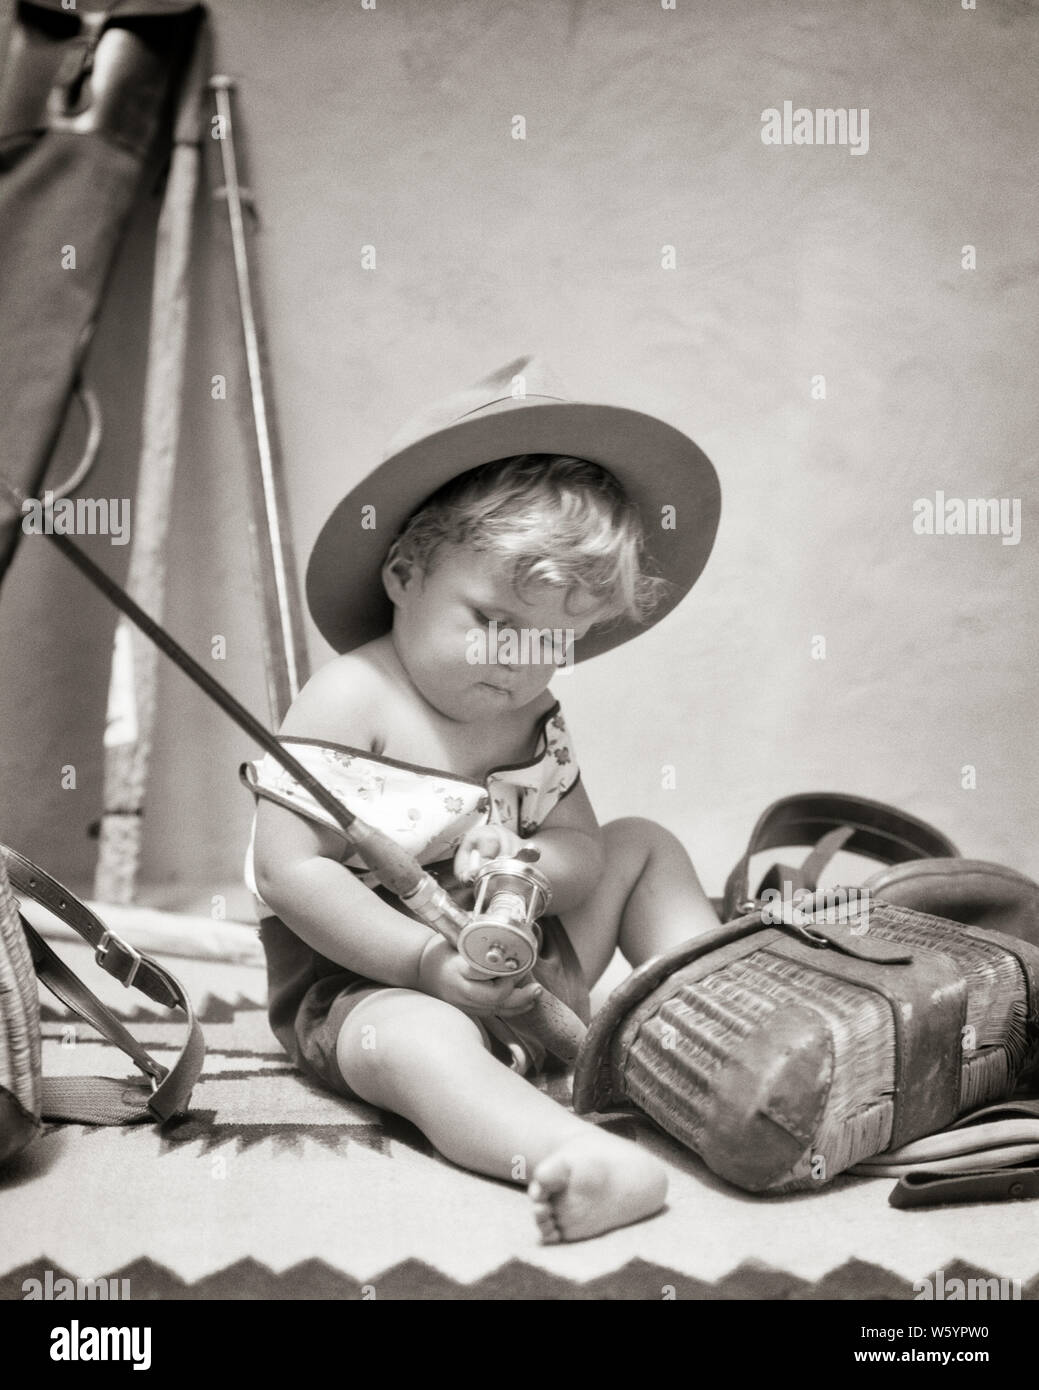 https://c8.alamy.com/comp/W5YPW0/1920s-1930s-engrossed-little-blonde-boy-toddler-wearing-big-hat-sitting-playing-with-fishing-gear-holding-turning-reel-handle-j3746-har001-hars-athletic-rod-bw-turning-dreams-happiness-adventure-discovery-excitement-recreation-reel-engrossed-conceptual-curious-handle-stylish-baby-boy-juveniles-big-hat-black-and-white-caucasian-ethnicity-creel-har001-inquisitive-old-fashioned-W5YPW0.jpg